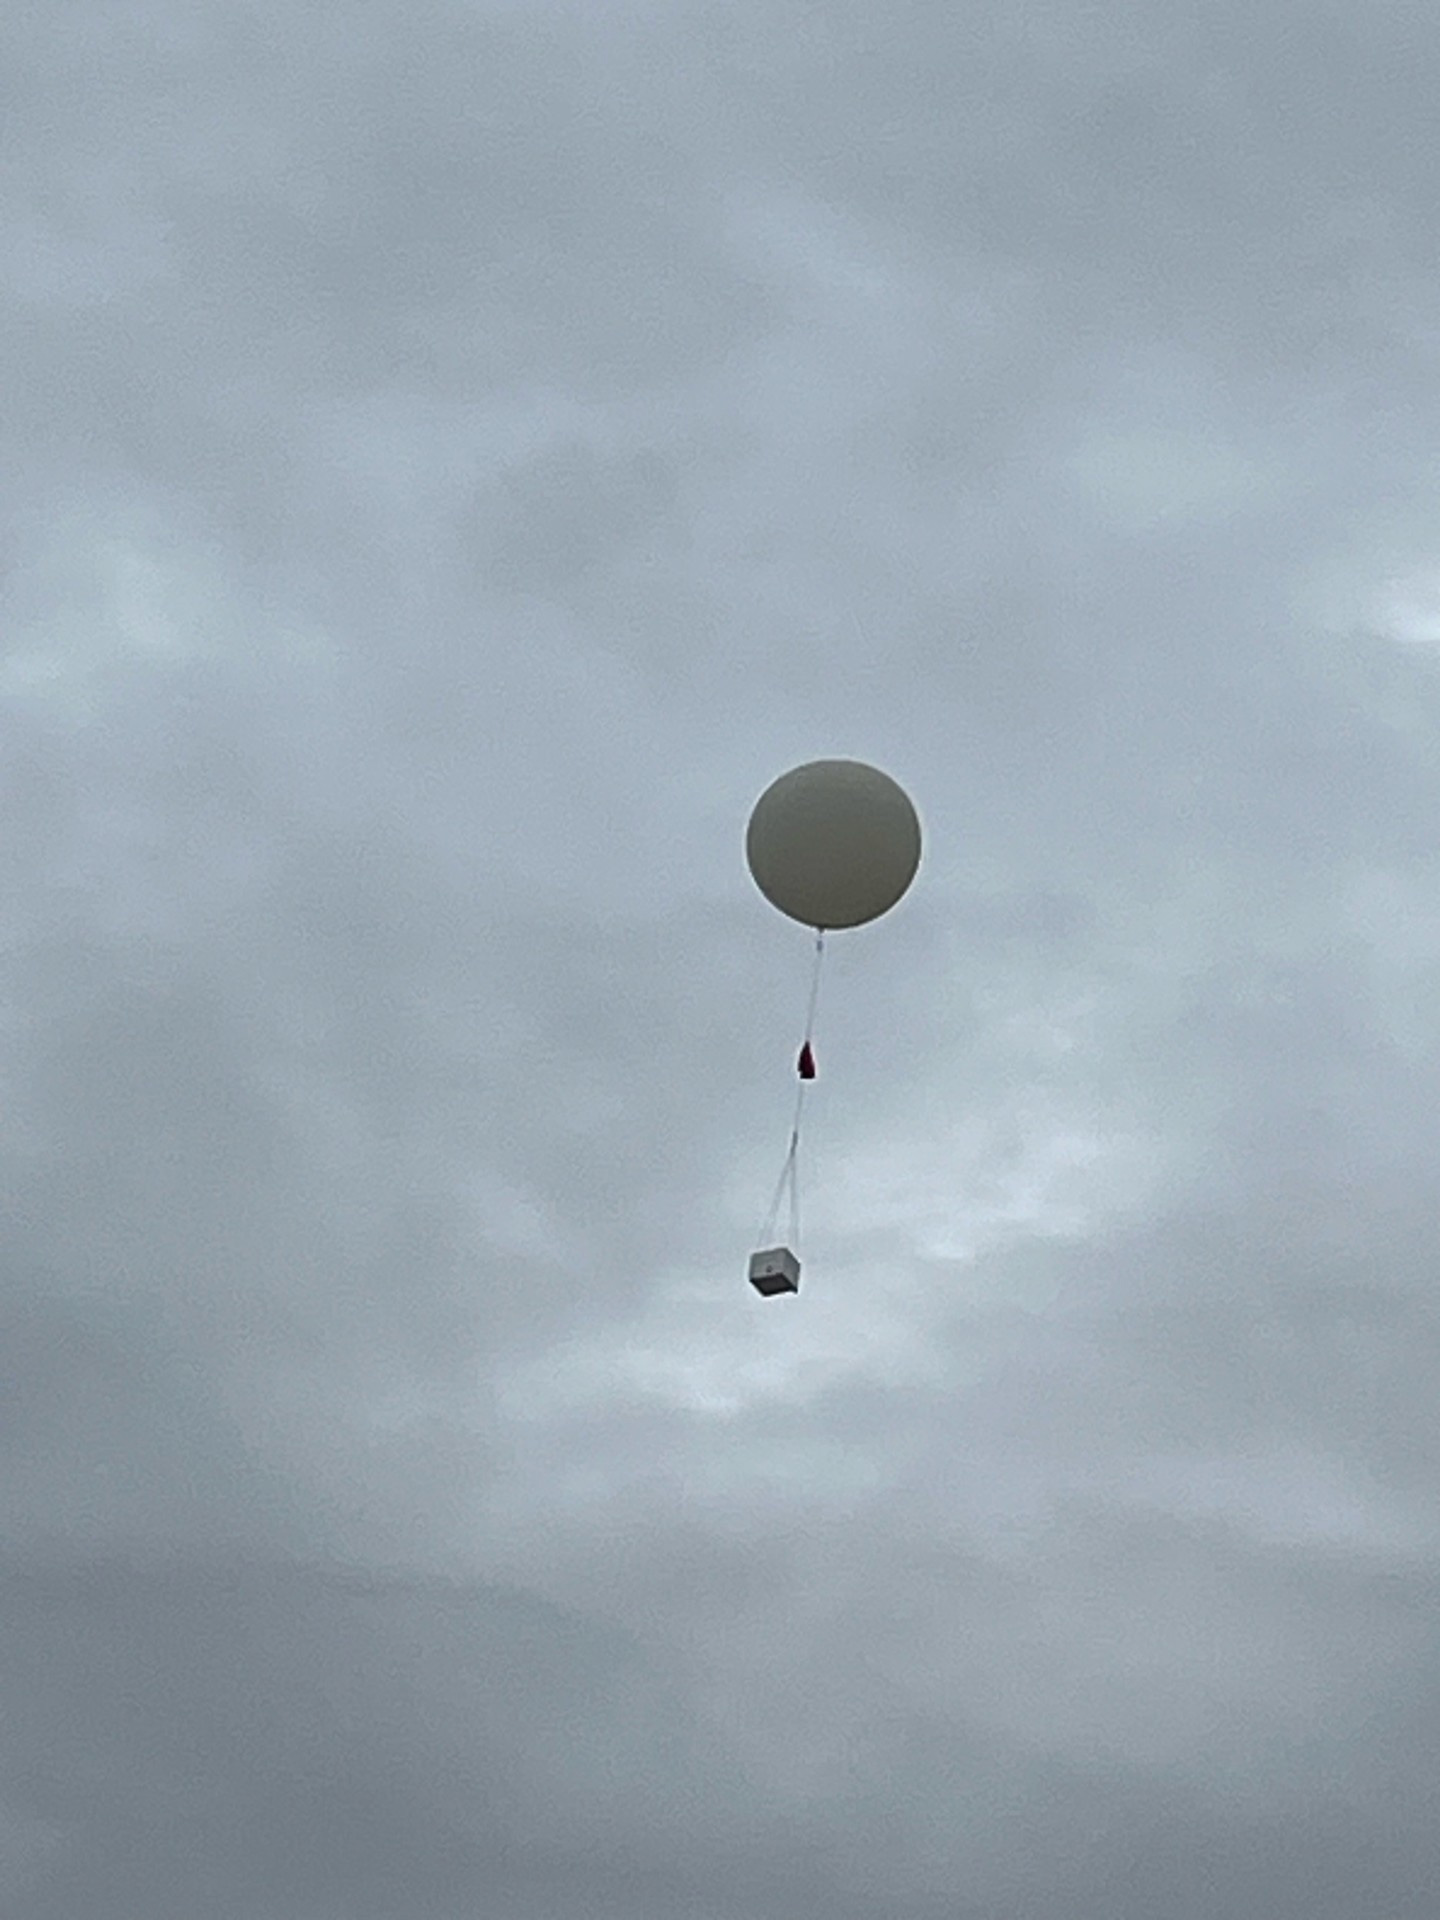 The team successfully launches the weather balloon and payload box.